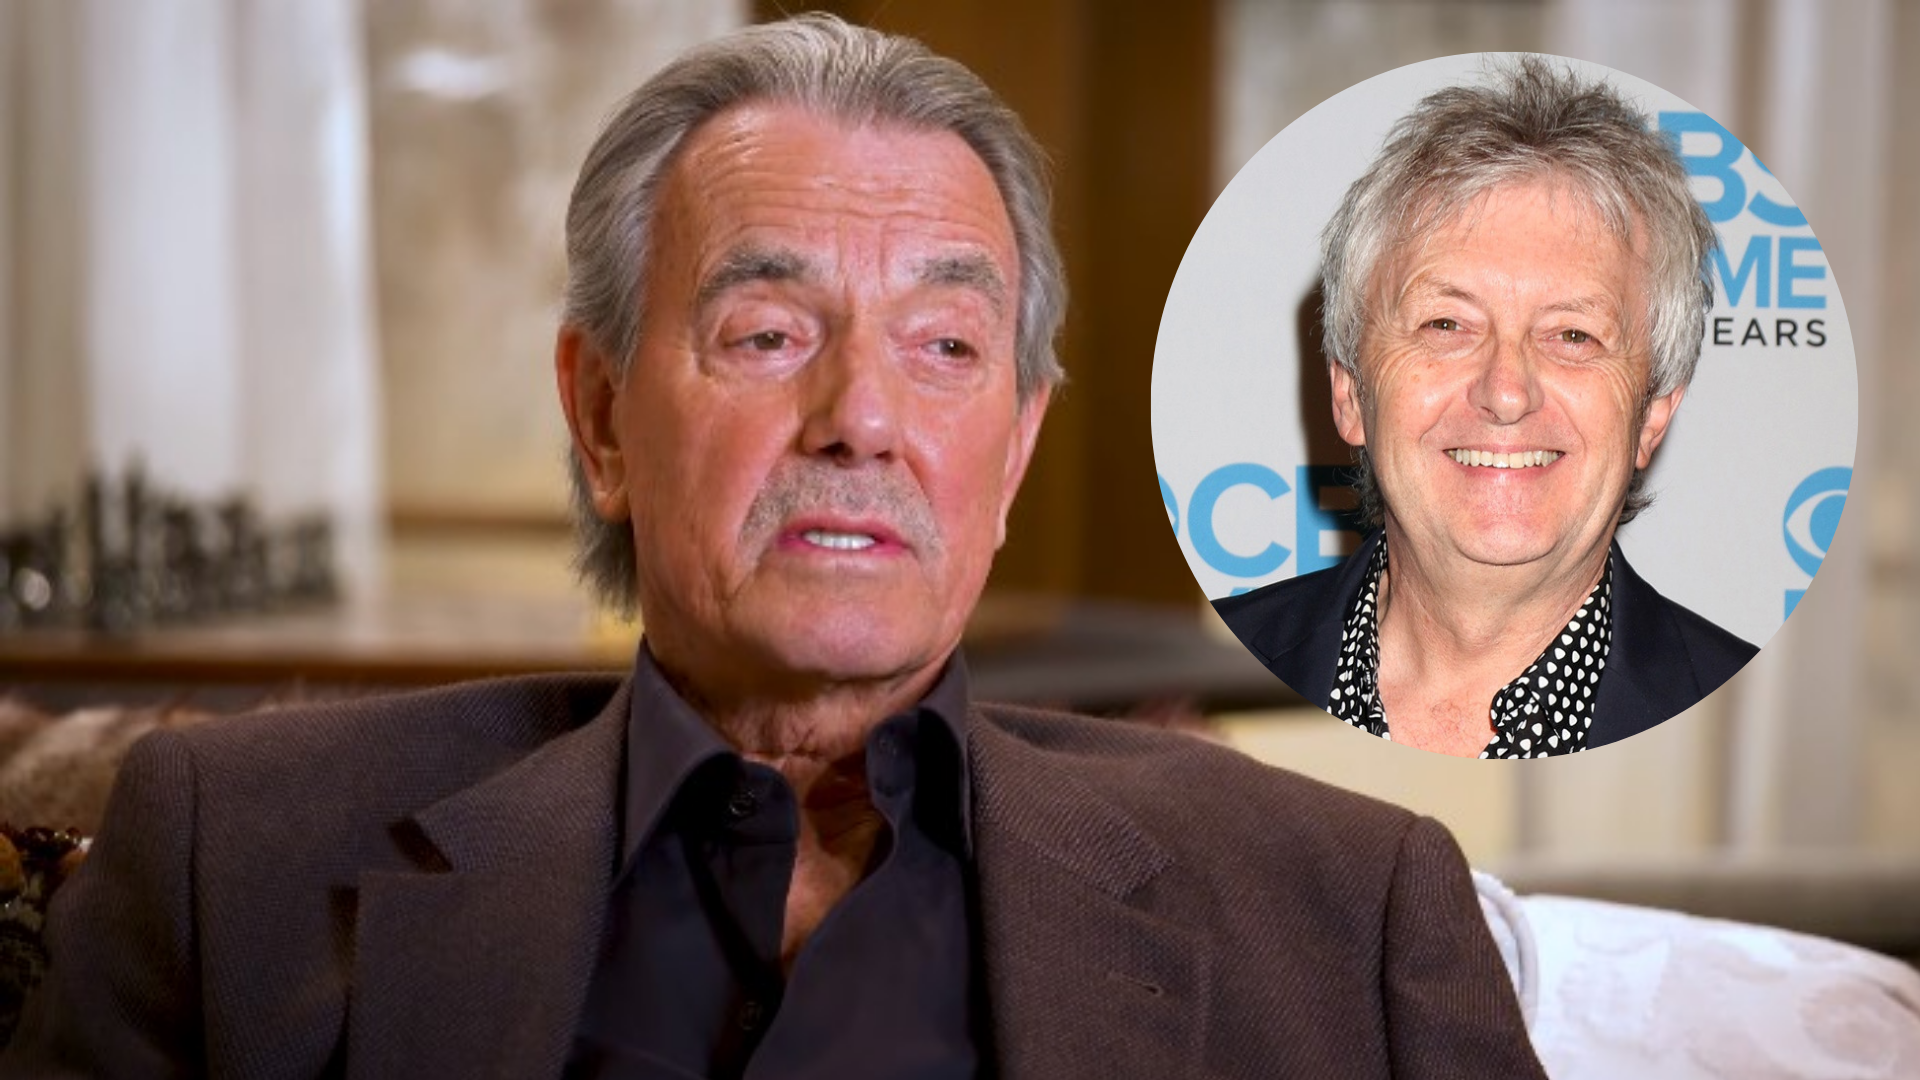  Eric Braeden blasts Mal Young for almost firing him from the Young and the Restless